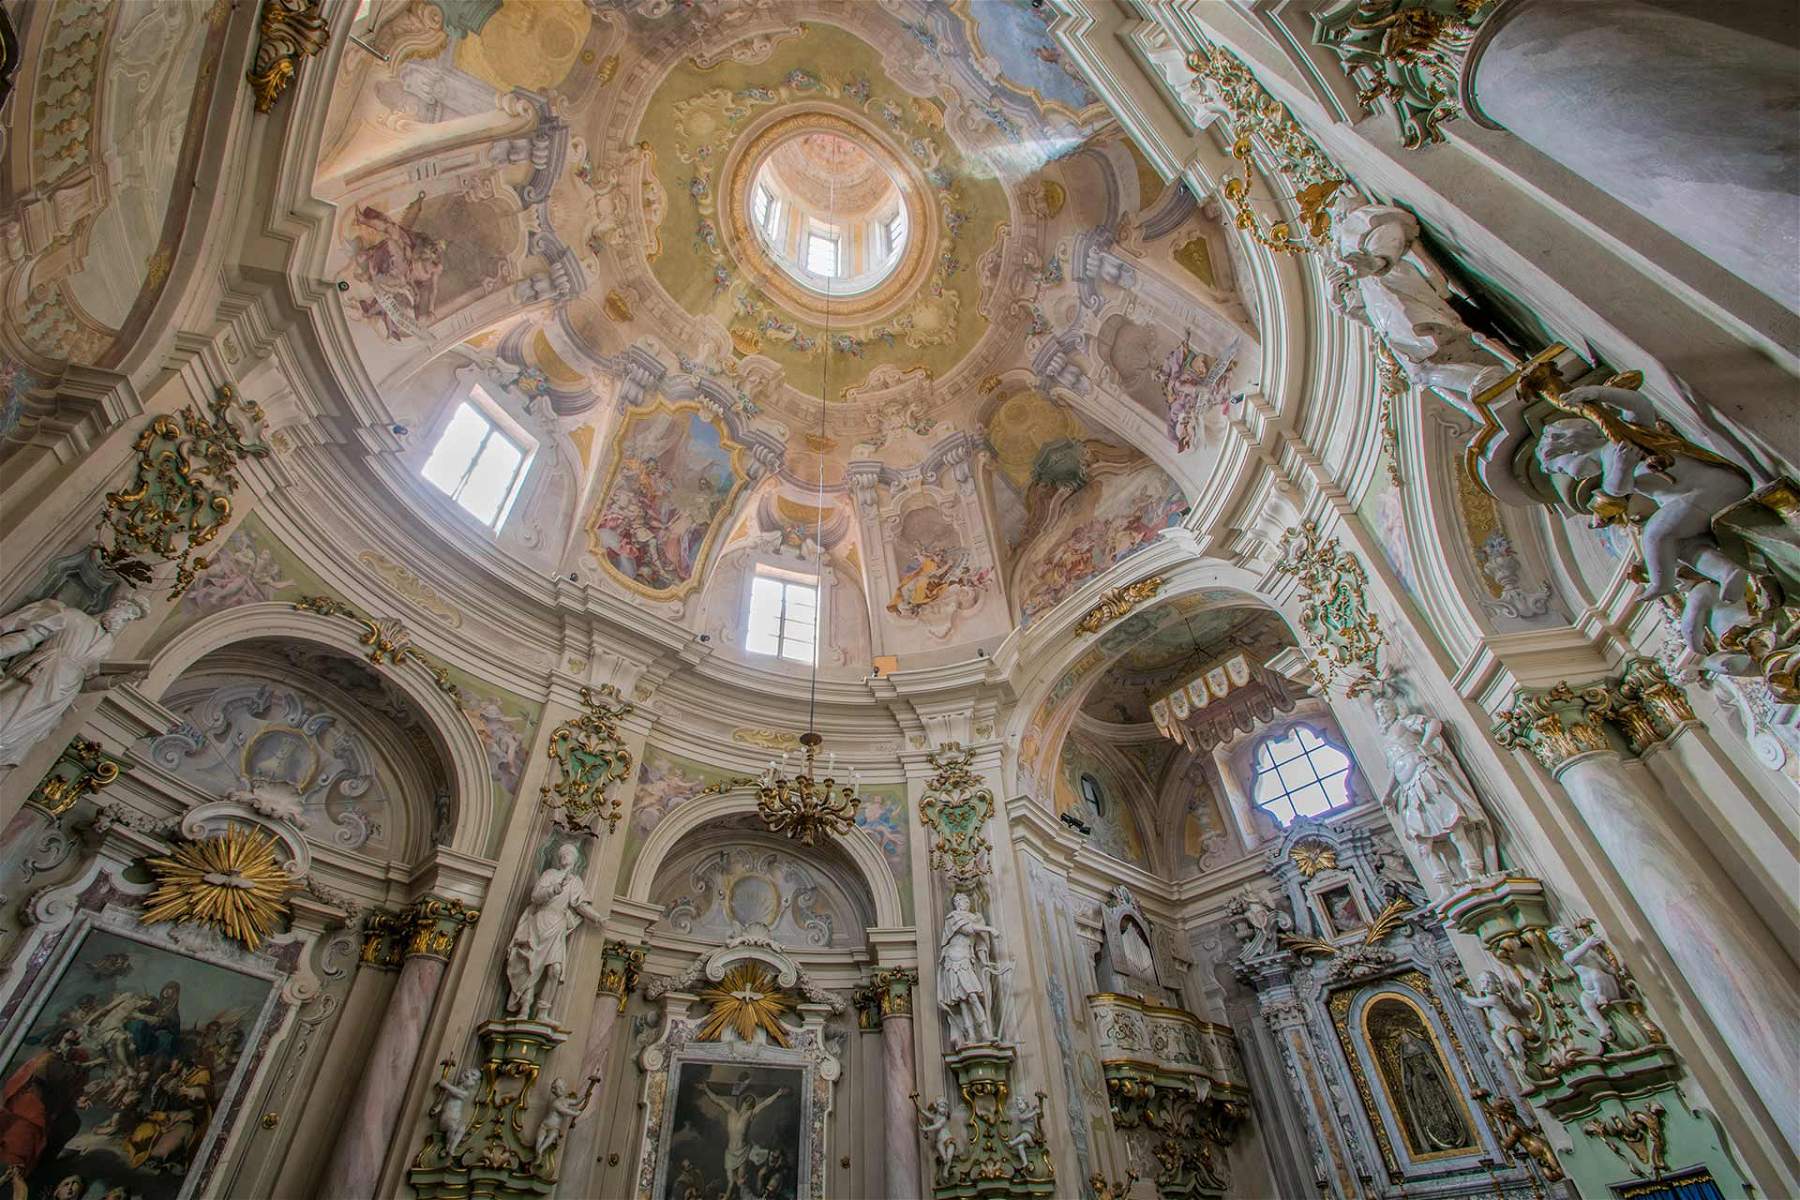 Pontremoli Baroque: April 16 extraordinary opening day at the city's palaces